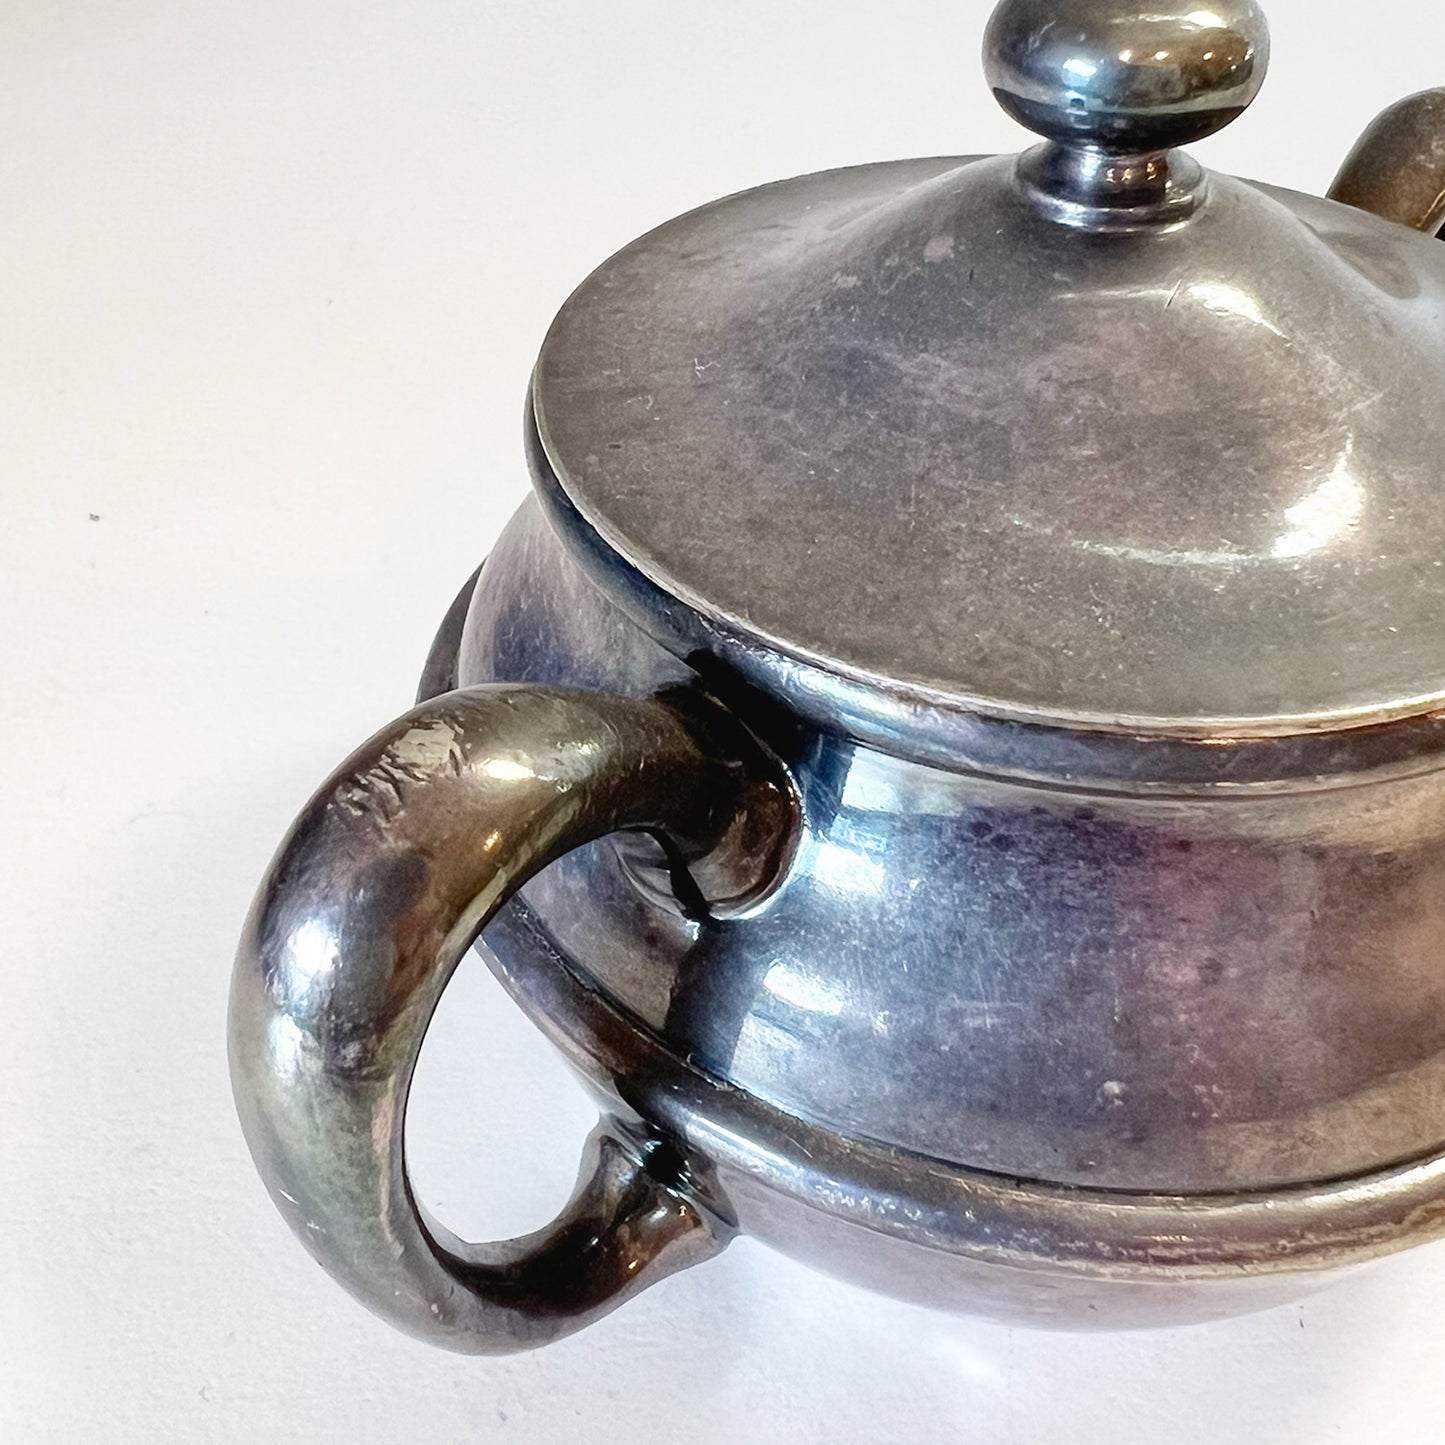 Close-up of a collectible silver sugar bowl with lid, showcasing a high-quality soldered handle seamlessly attached to the body, in a 3/4 top view